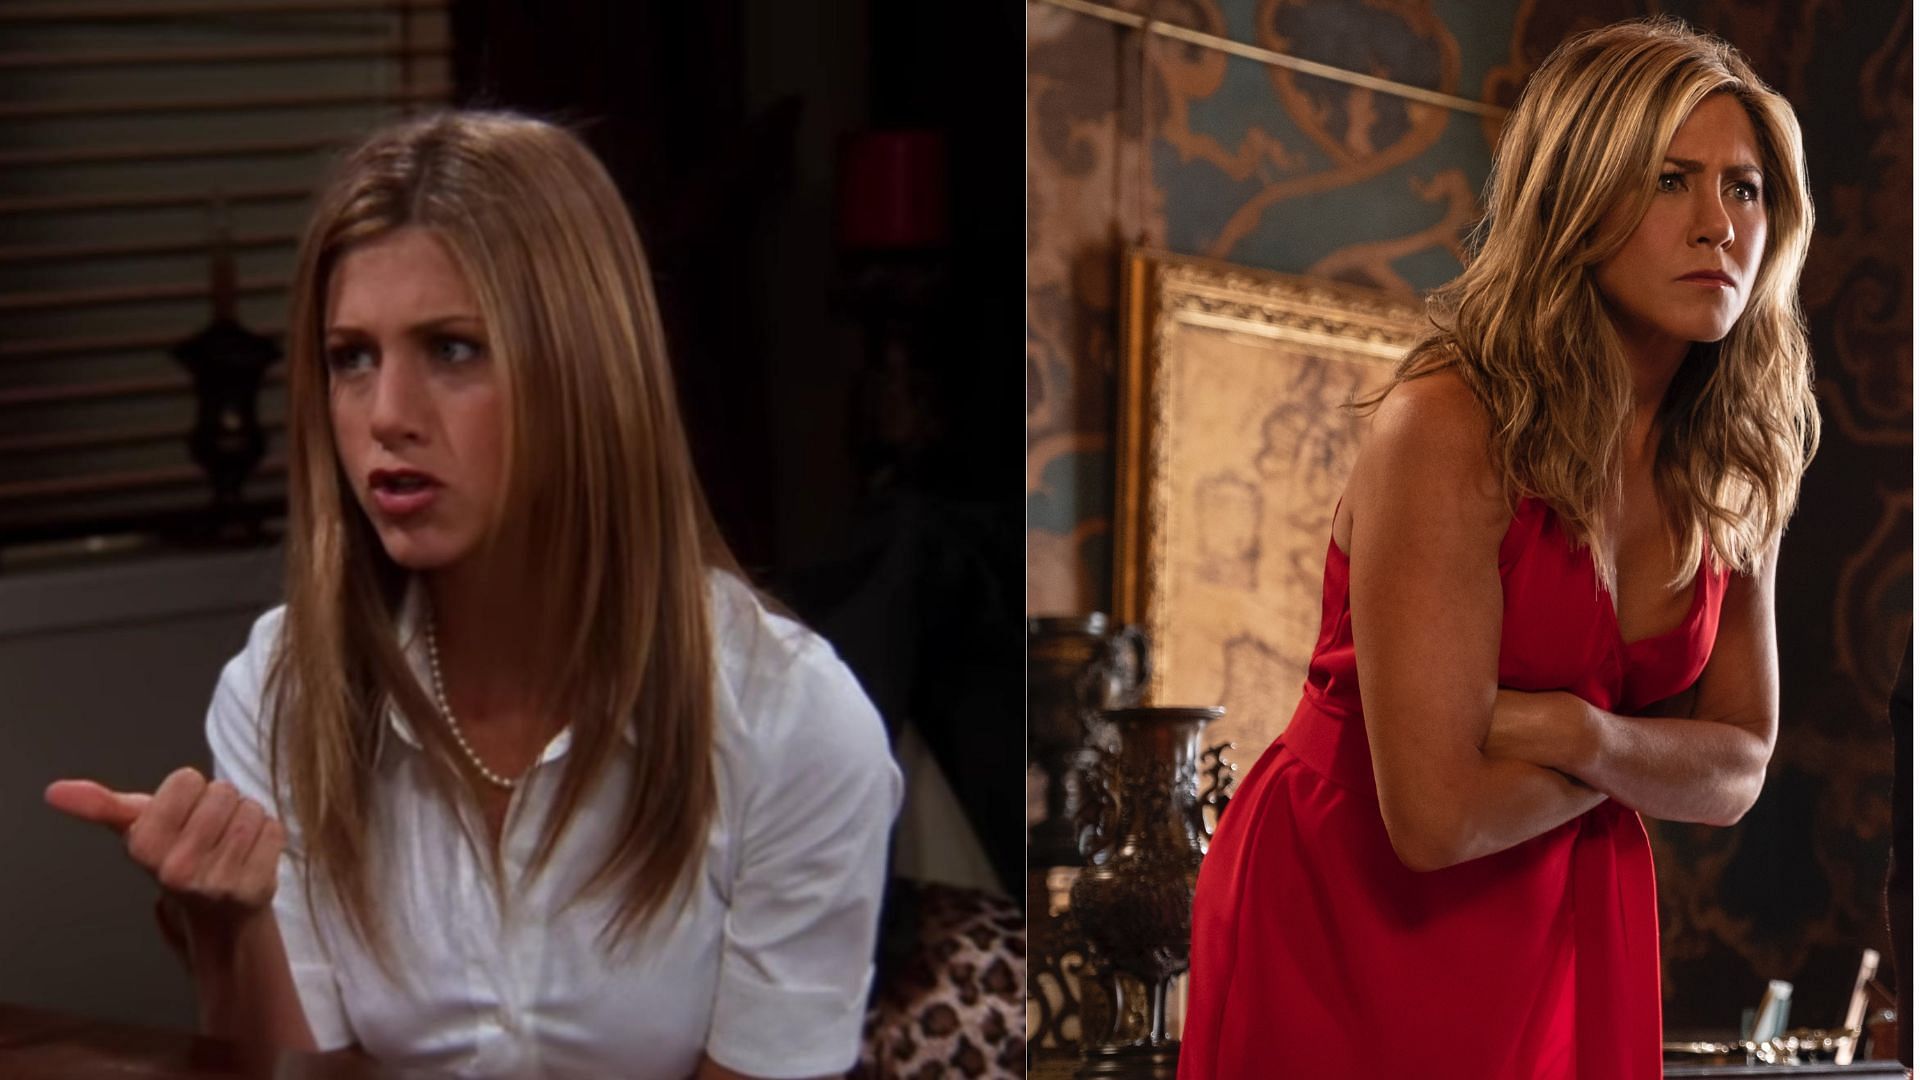 Jennifer Aniston in Friends and Murder Mystery 2 (Images via IMDB)